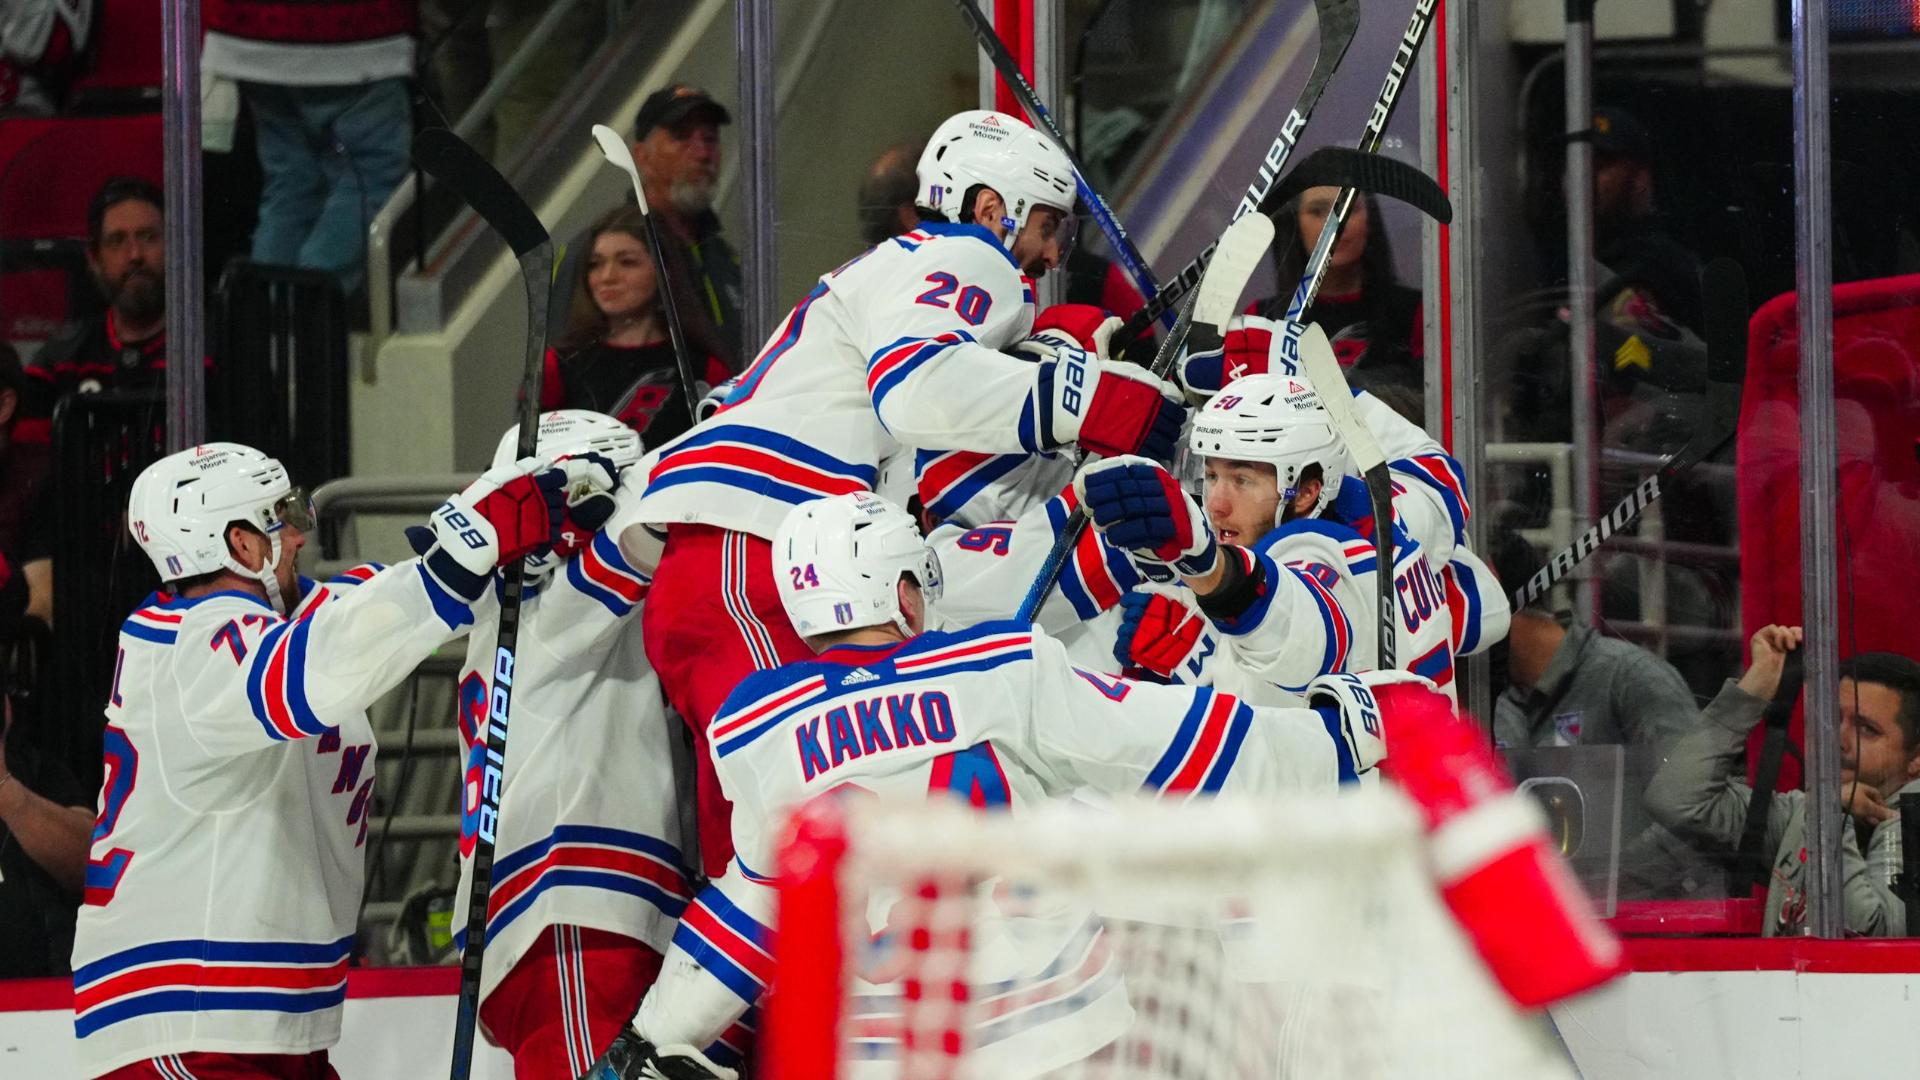 The Rangers stay playoff perfect with Game 3 win